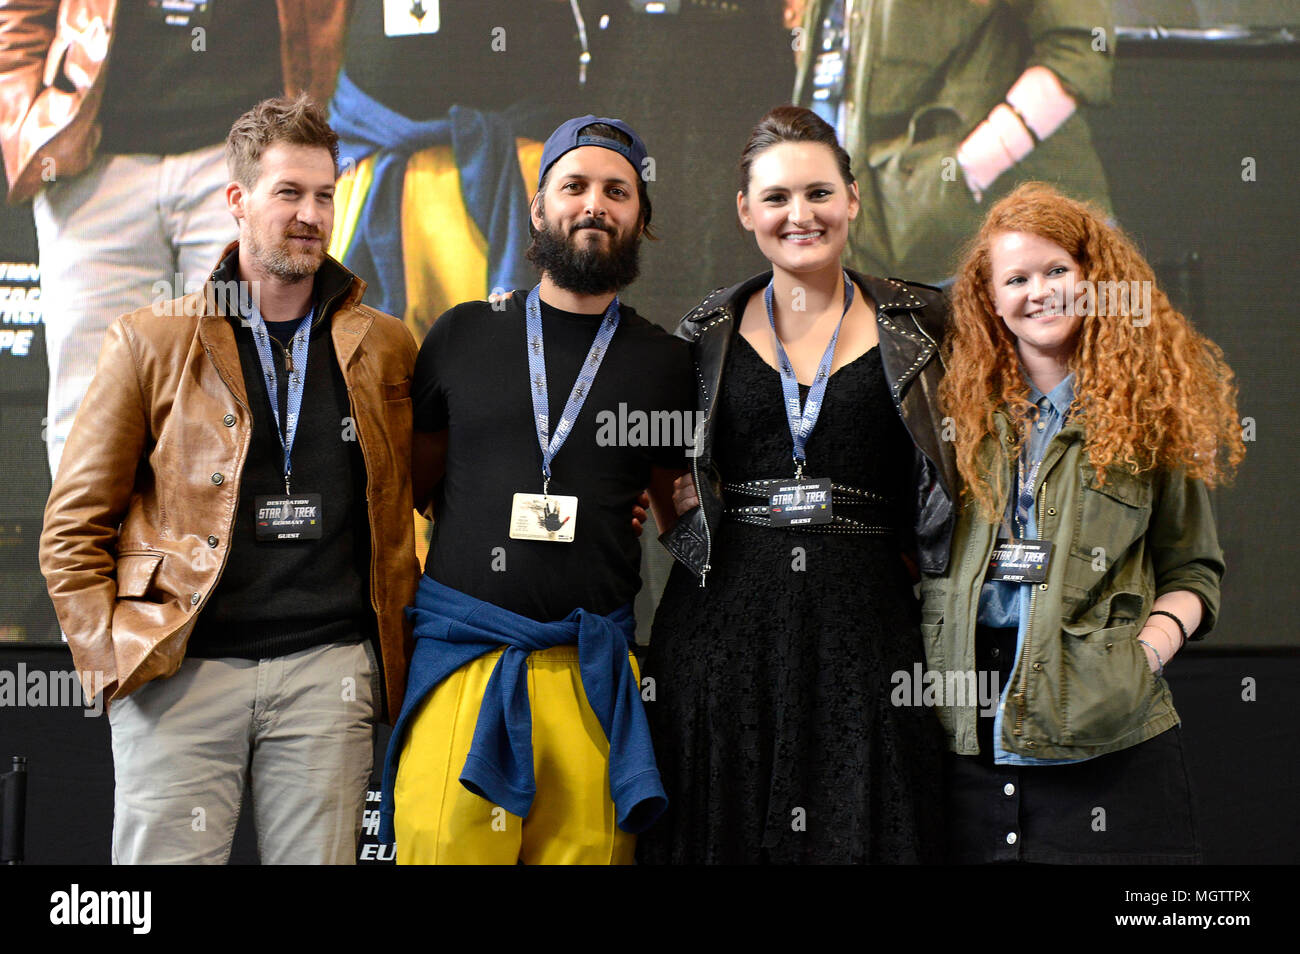 Dortmund, Germany. 27th Apr, 2018. Kenneth withchell, Shazad Latif, Mary Chieffo and Mary Wiseman at the Destination Star Trek Germany Convention in the Westfalenhalle. Dortmund, 27.04.2018 | usage worldwide Credit: dpa picture alliance/Alamy Live News Stock Photo